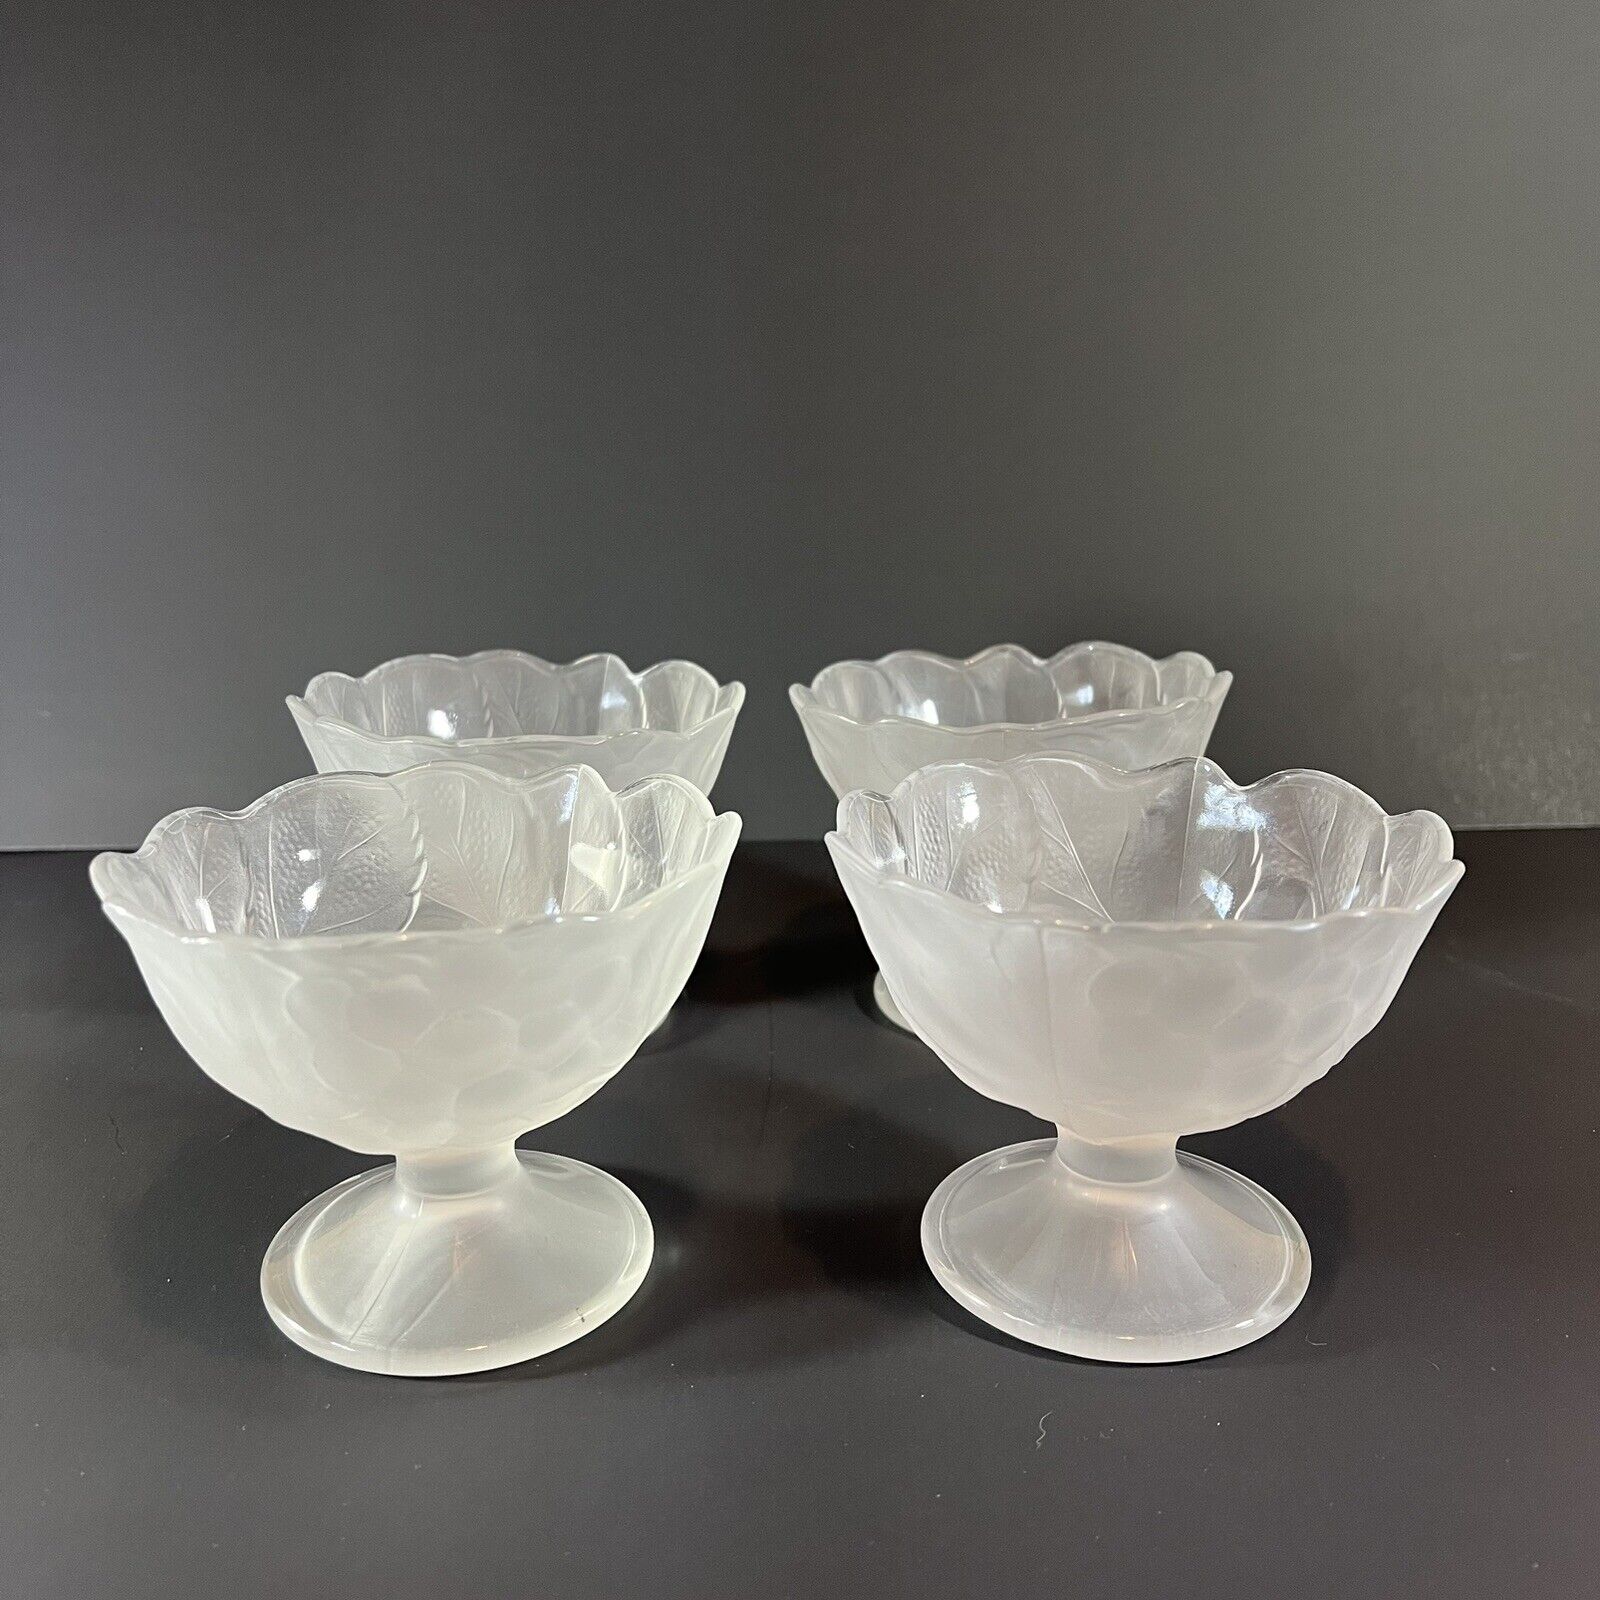 Set Of 4 Hoya Japan Textured Frosted Sherbet Ice Cream Bowls